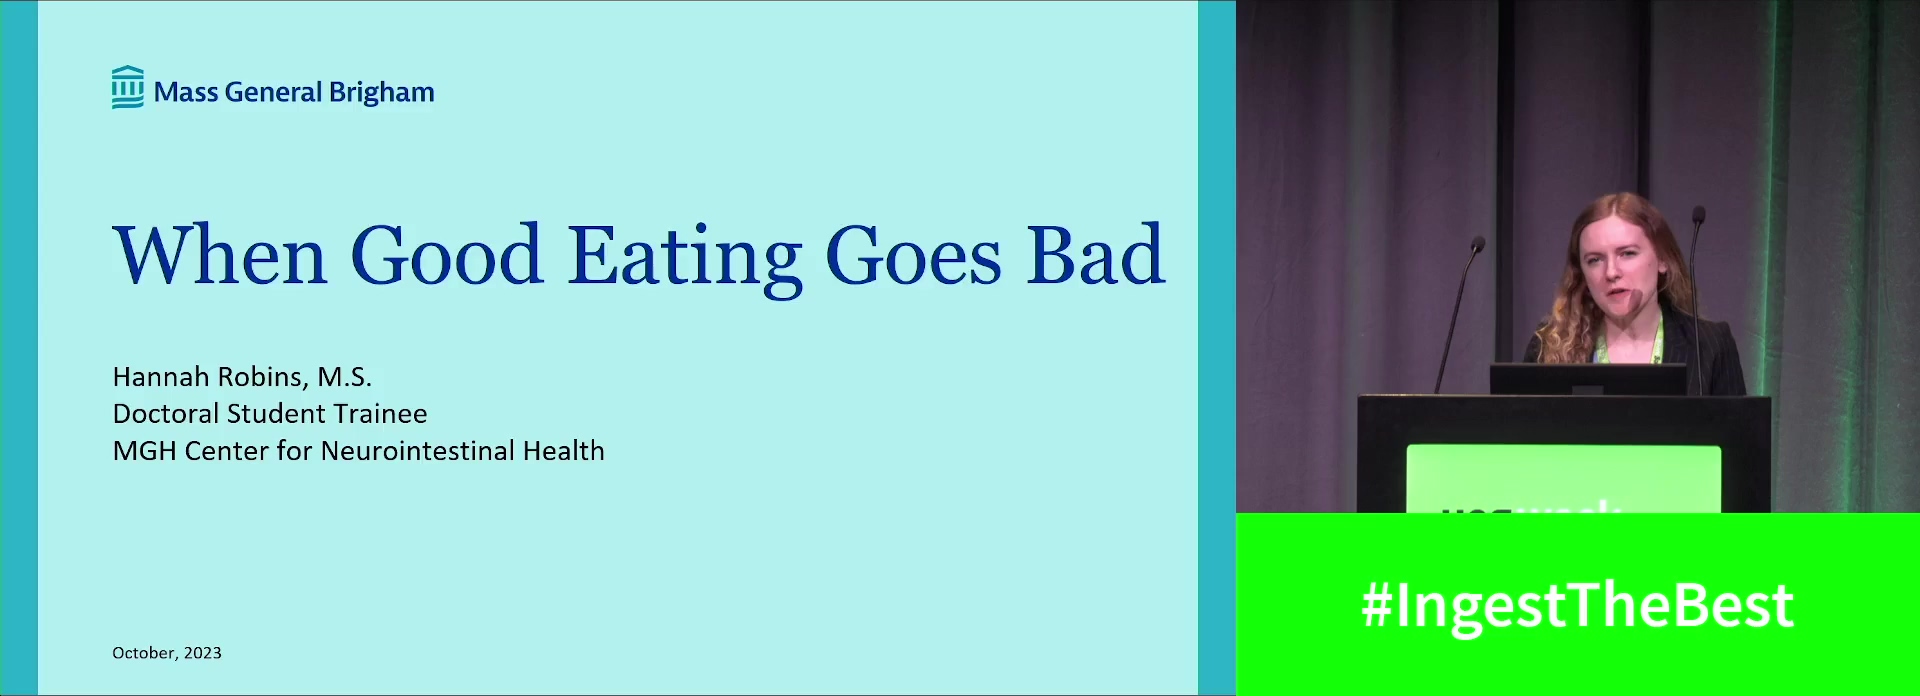 When good eating goes bad